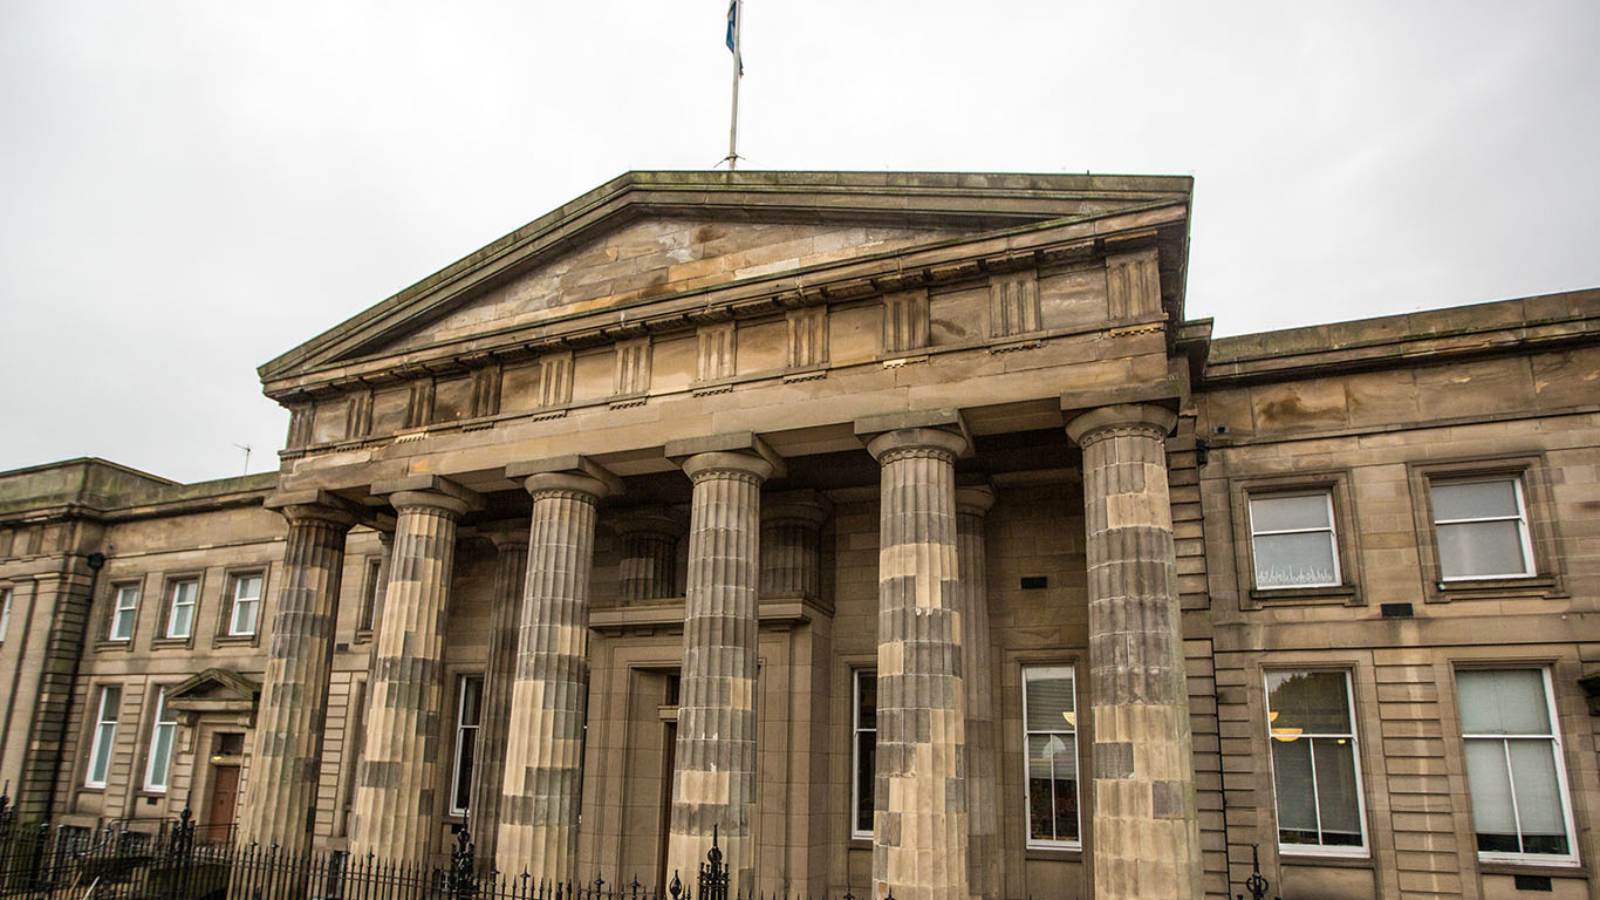 High Court of Justiciary on Saltmarket, Glasgow